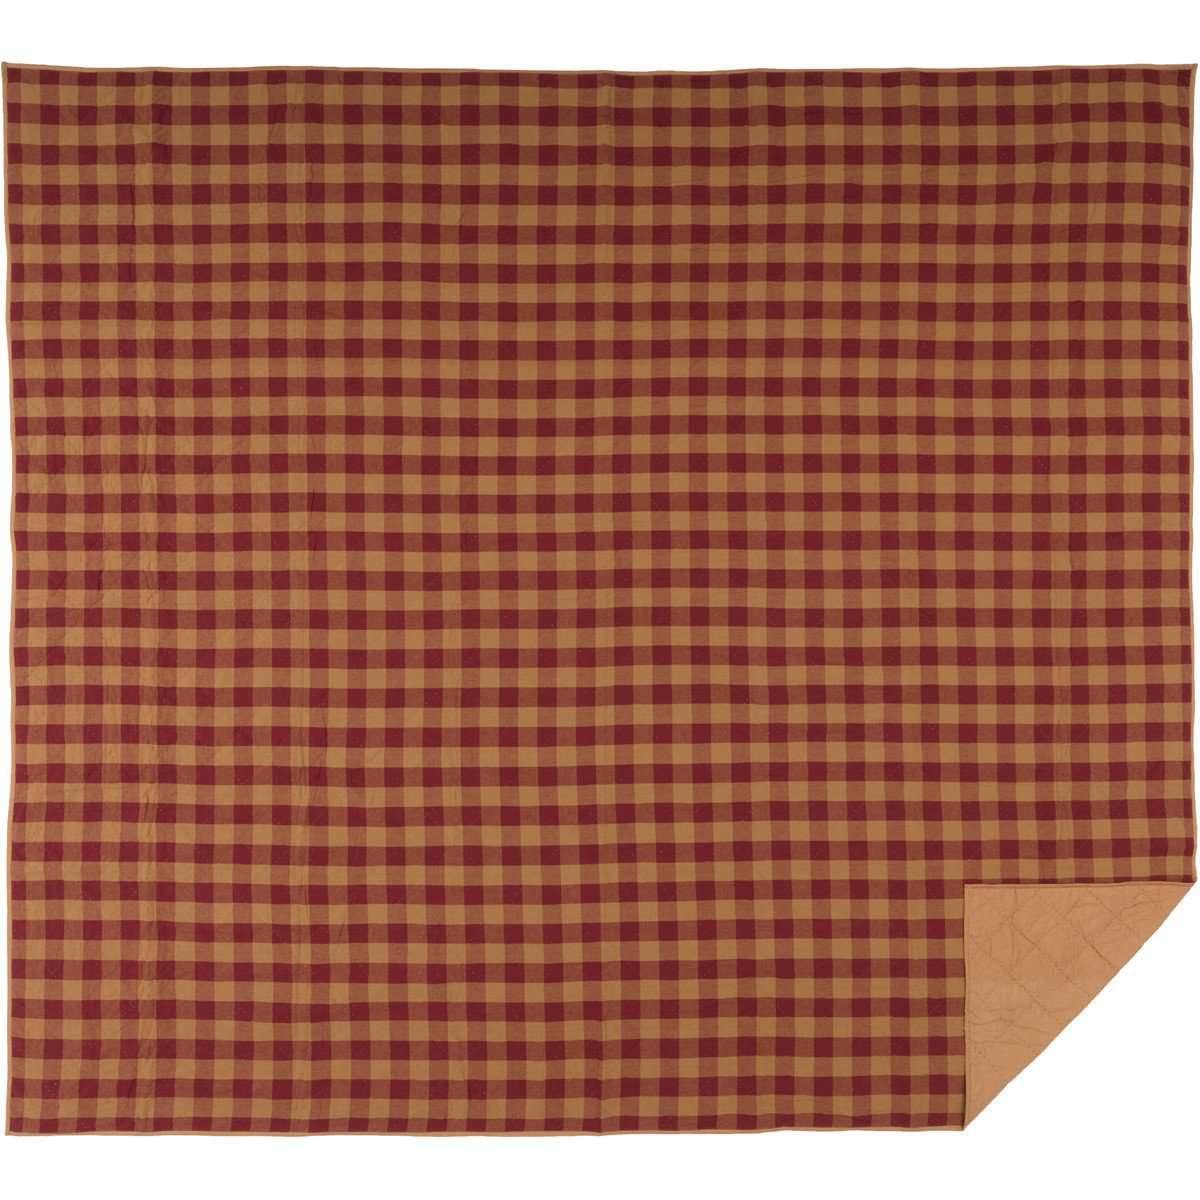 Burgundy Check Quilt Coverlet VHC Brands luxury king